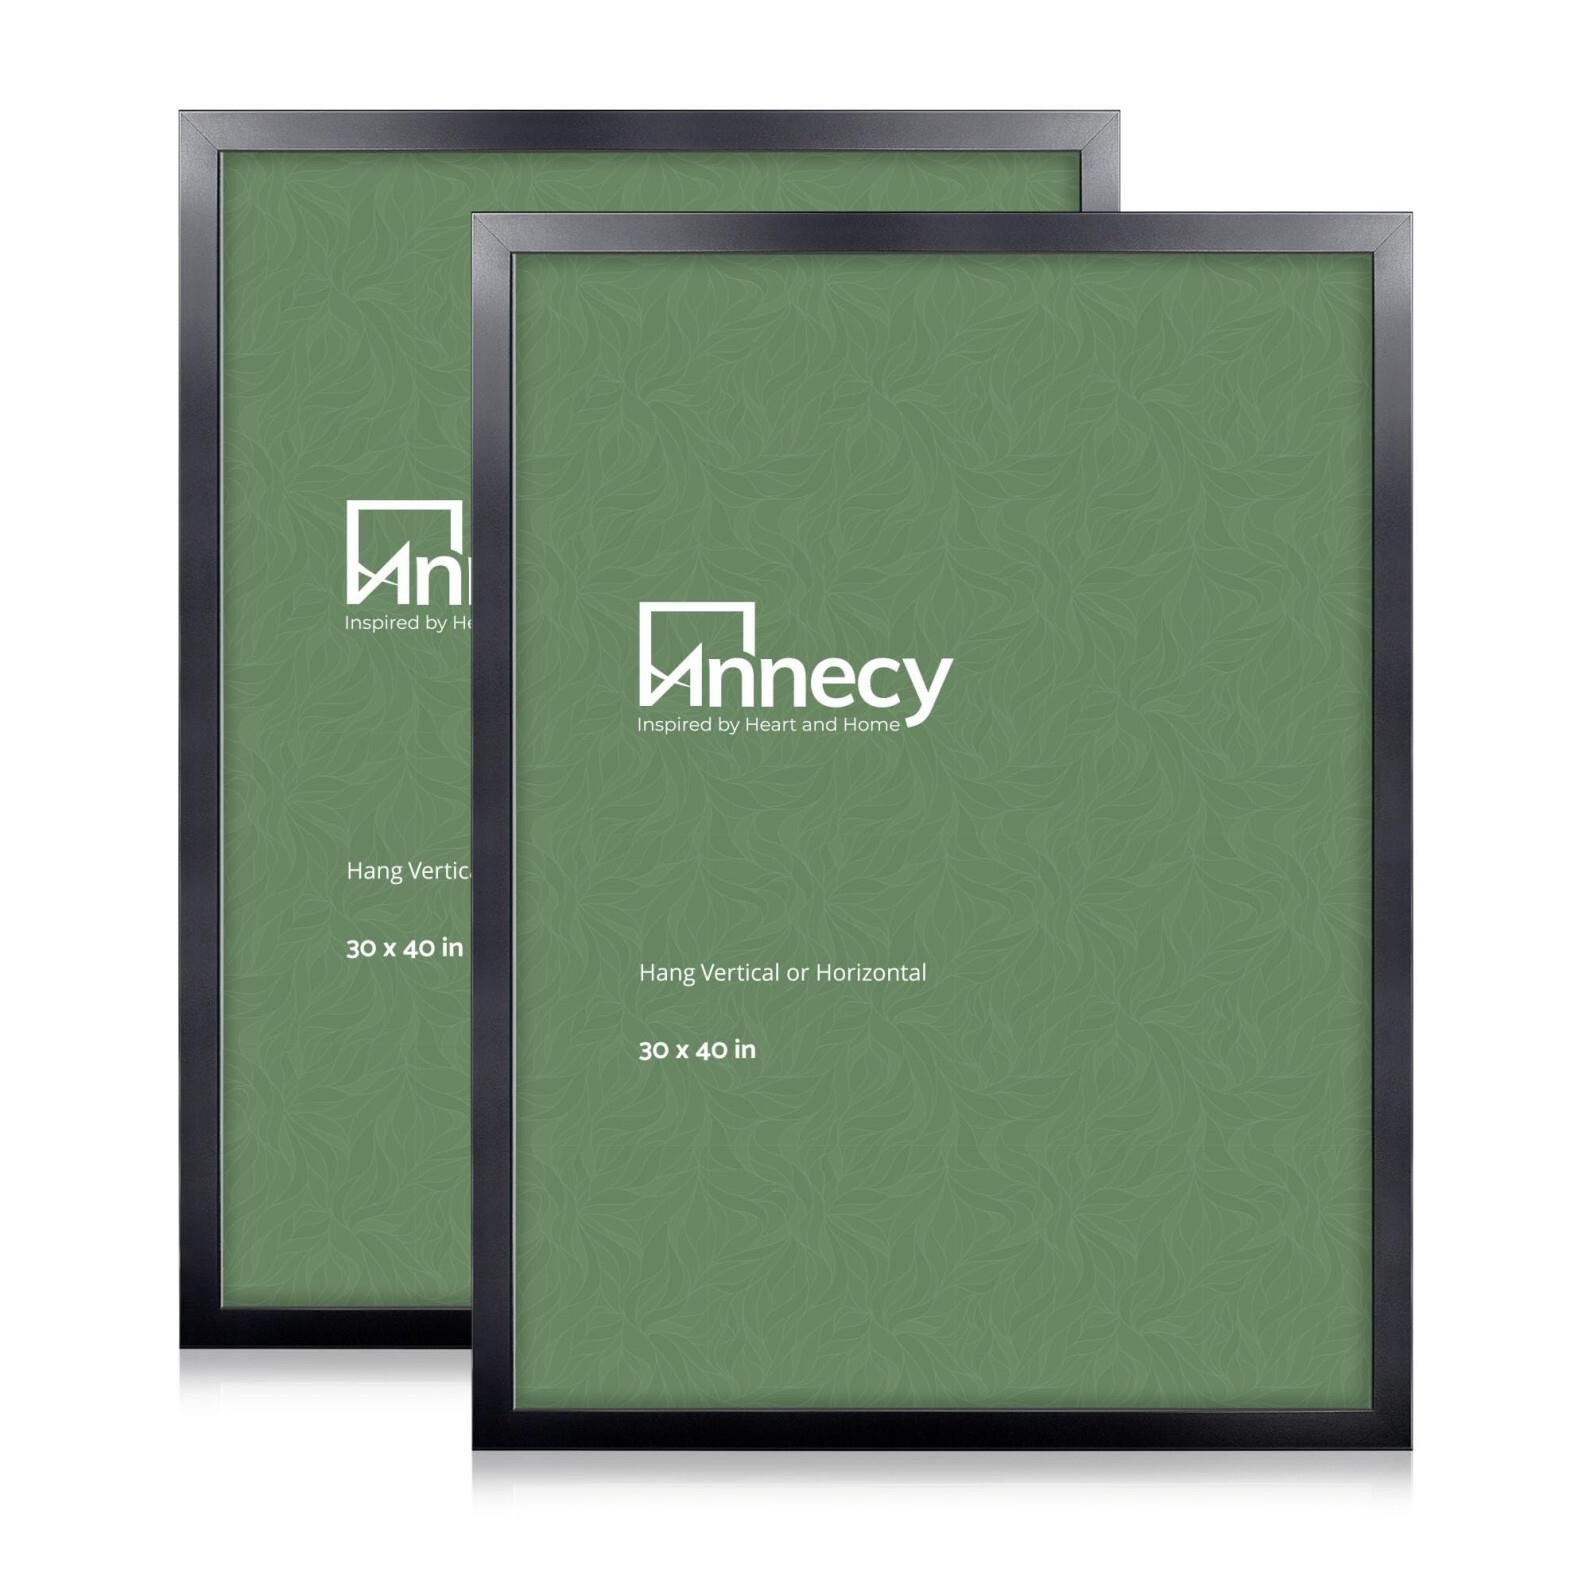 Annecy 30x40 Picture Frame Black (2 Pack), 30 x 40